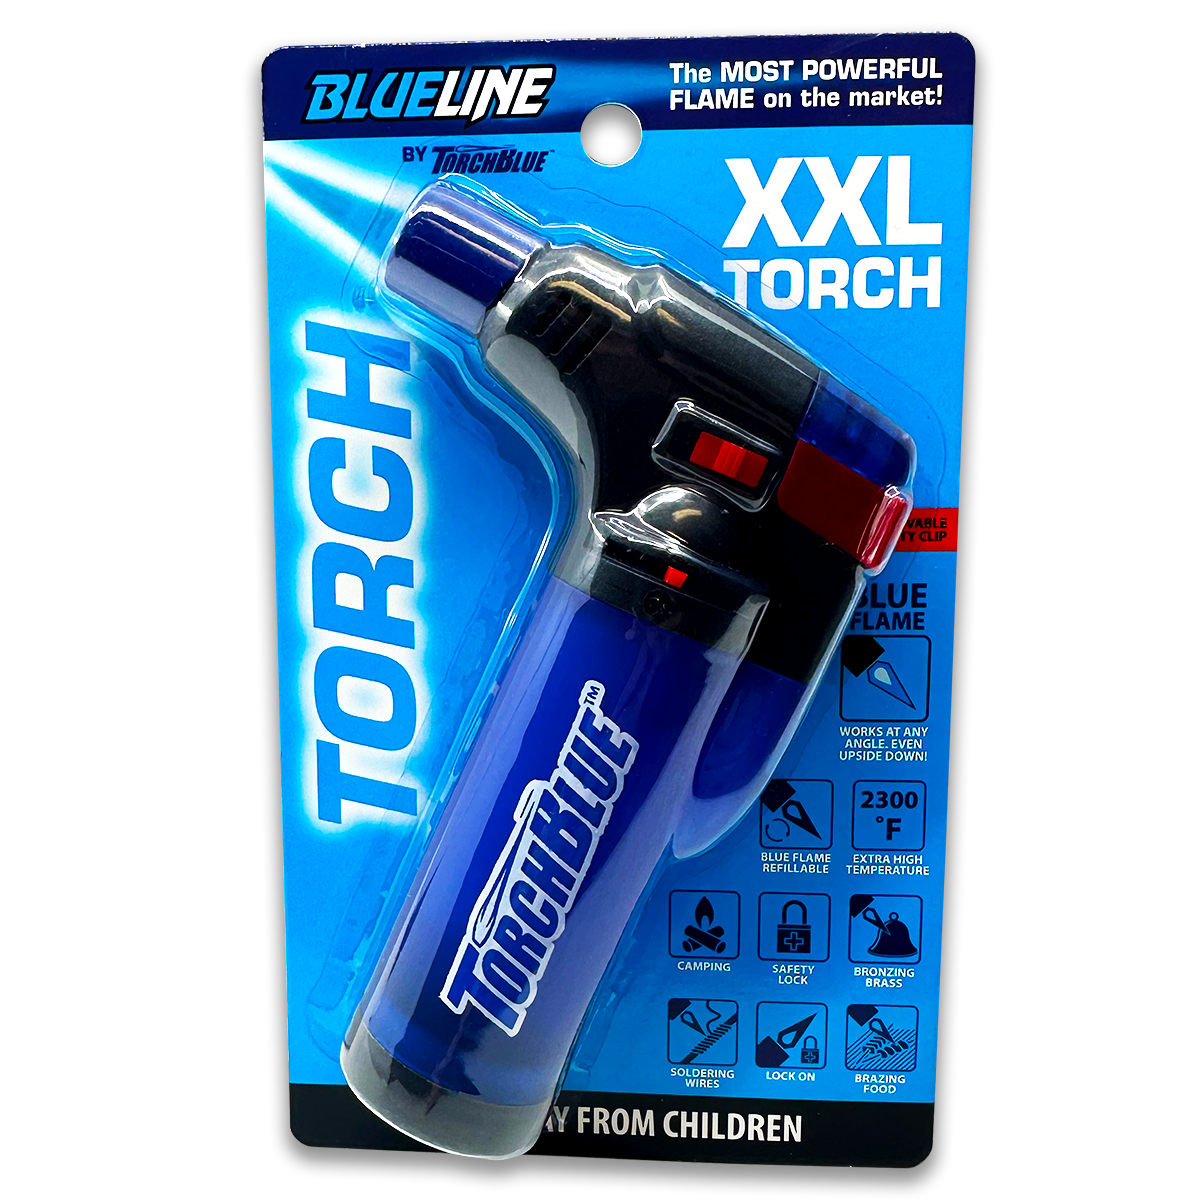 ITEM NUMBER 040299 CARDED TB XXL TORCH 12 PIECES PER PACK